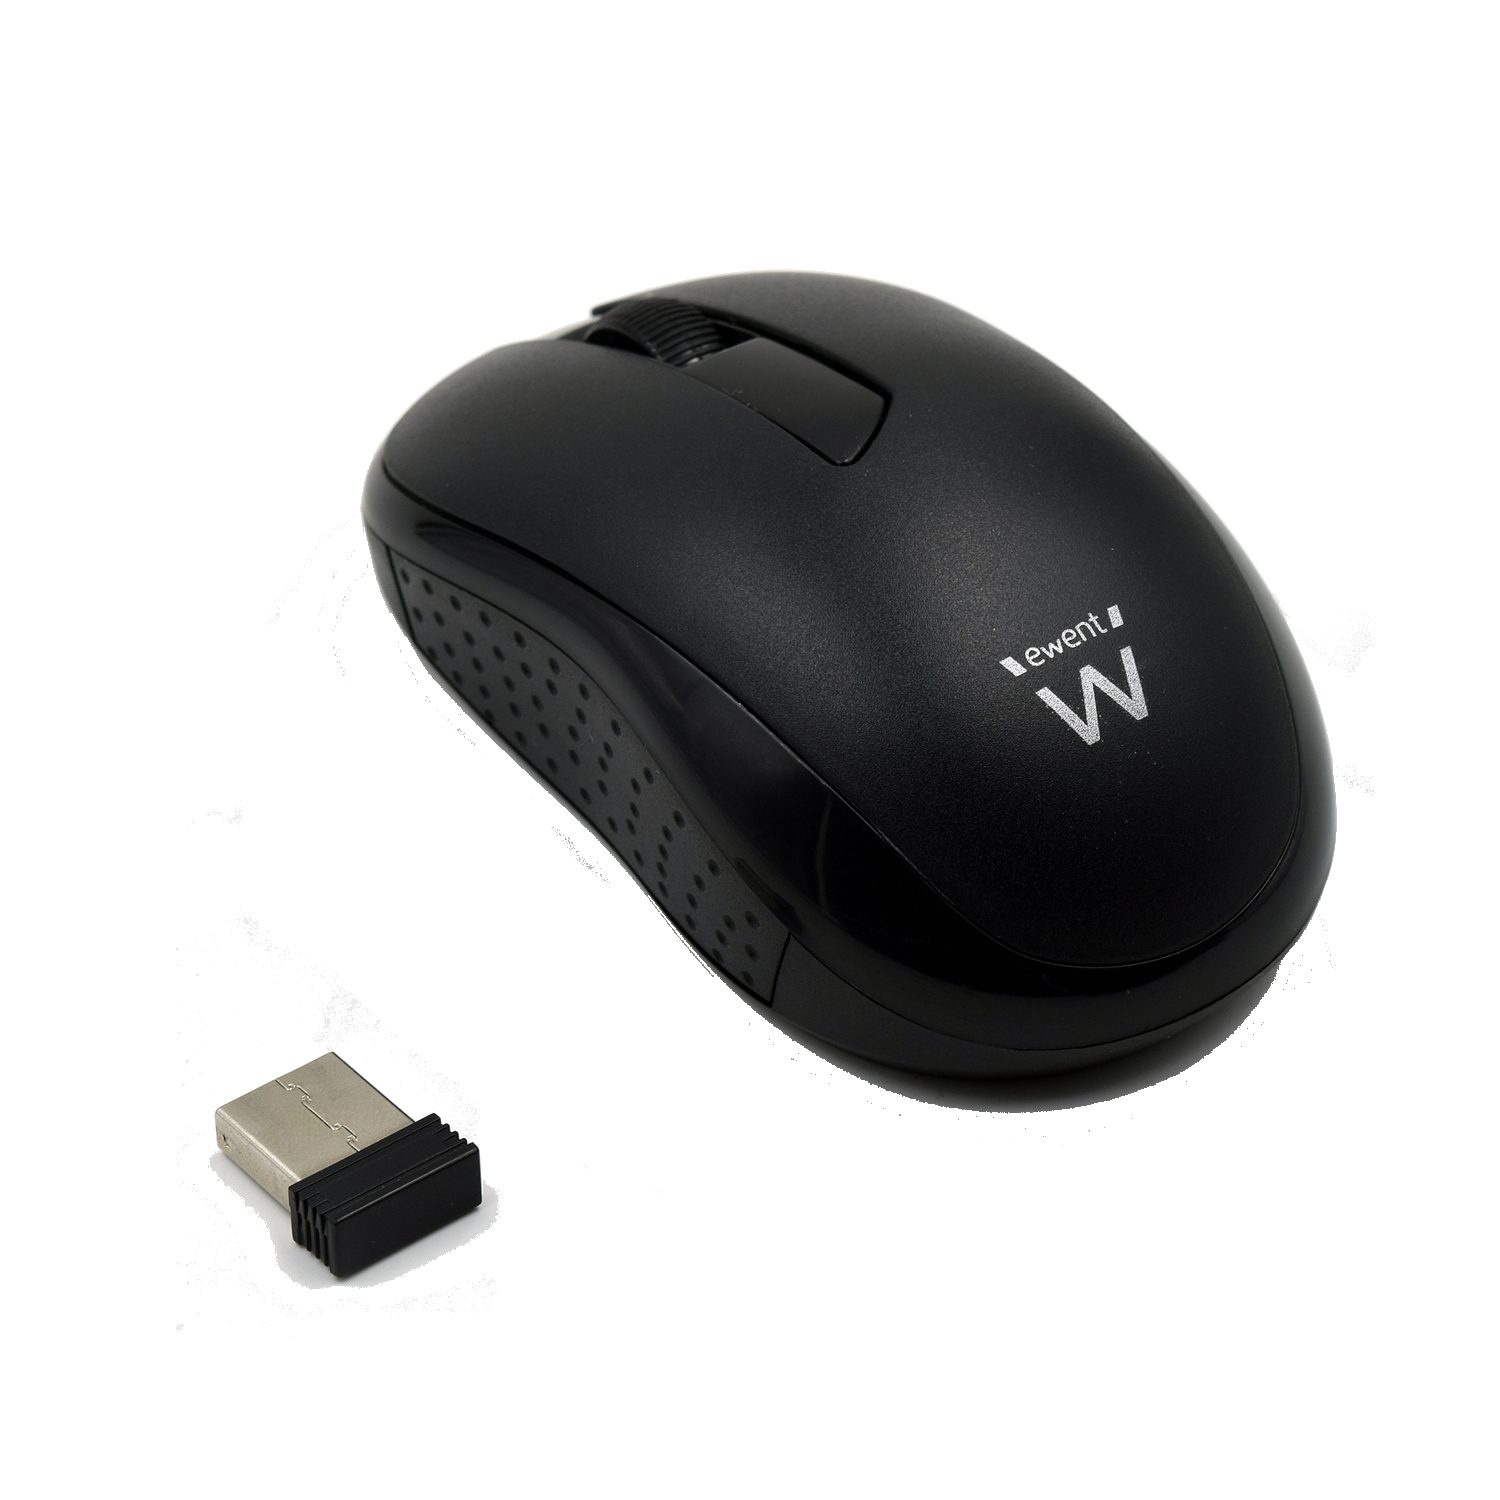 8054392610028-PN-EW3223-Cod.-Articulo-MGS0000016226-Mouse-raton-ewent-ew3223-wireless-inalambrico-1000-ppp-1